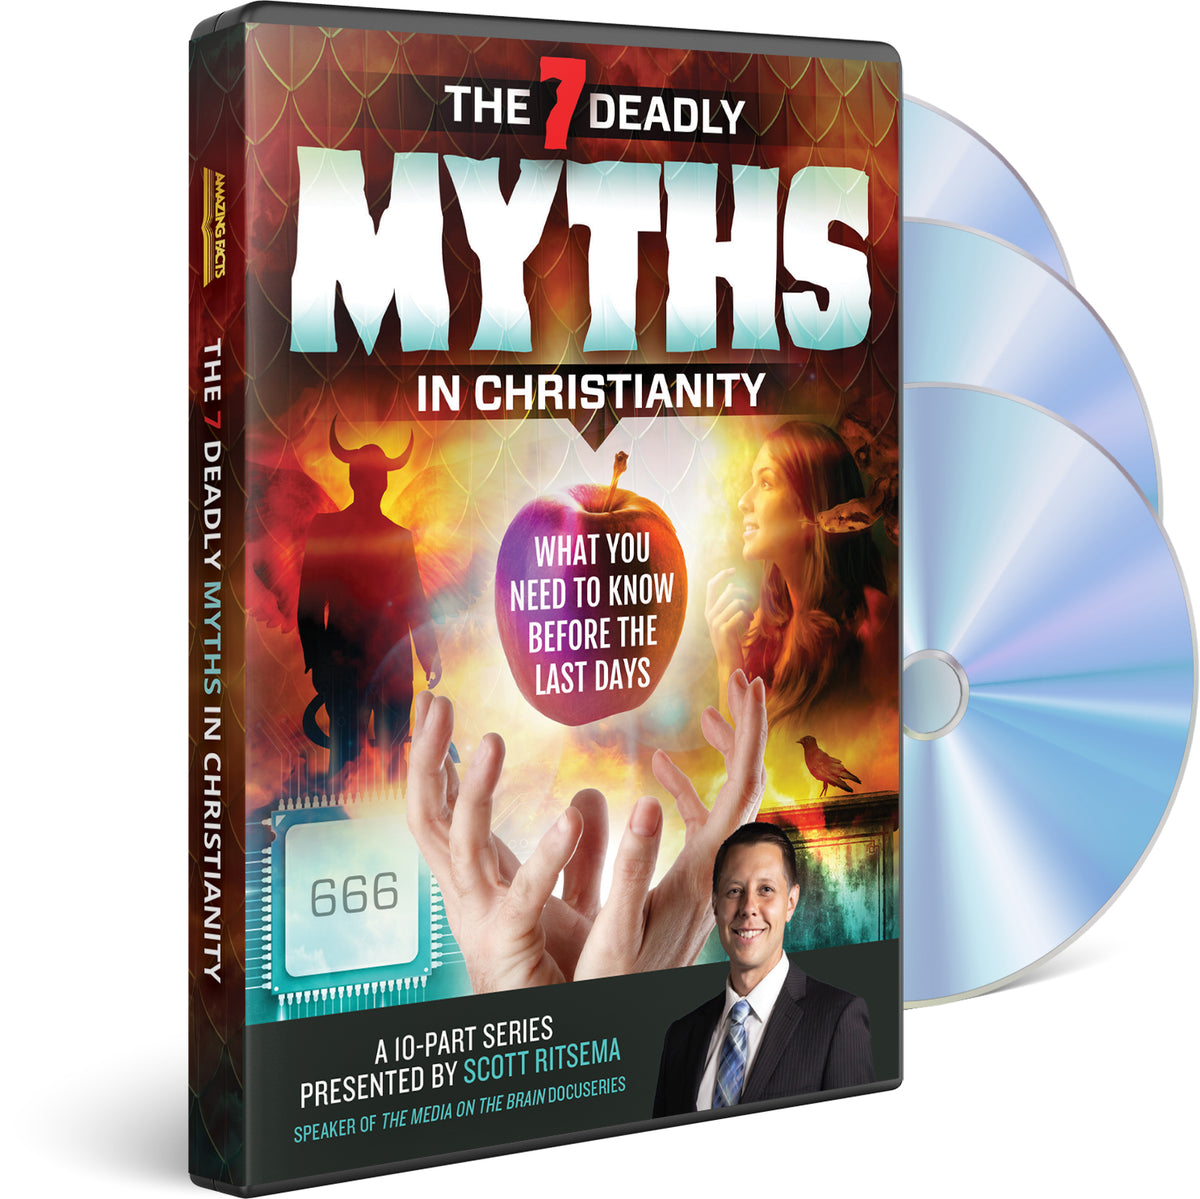 The 7 Deadly Myths DVD Set (10 Messages on 3 DVDs) by Scott Ritsema